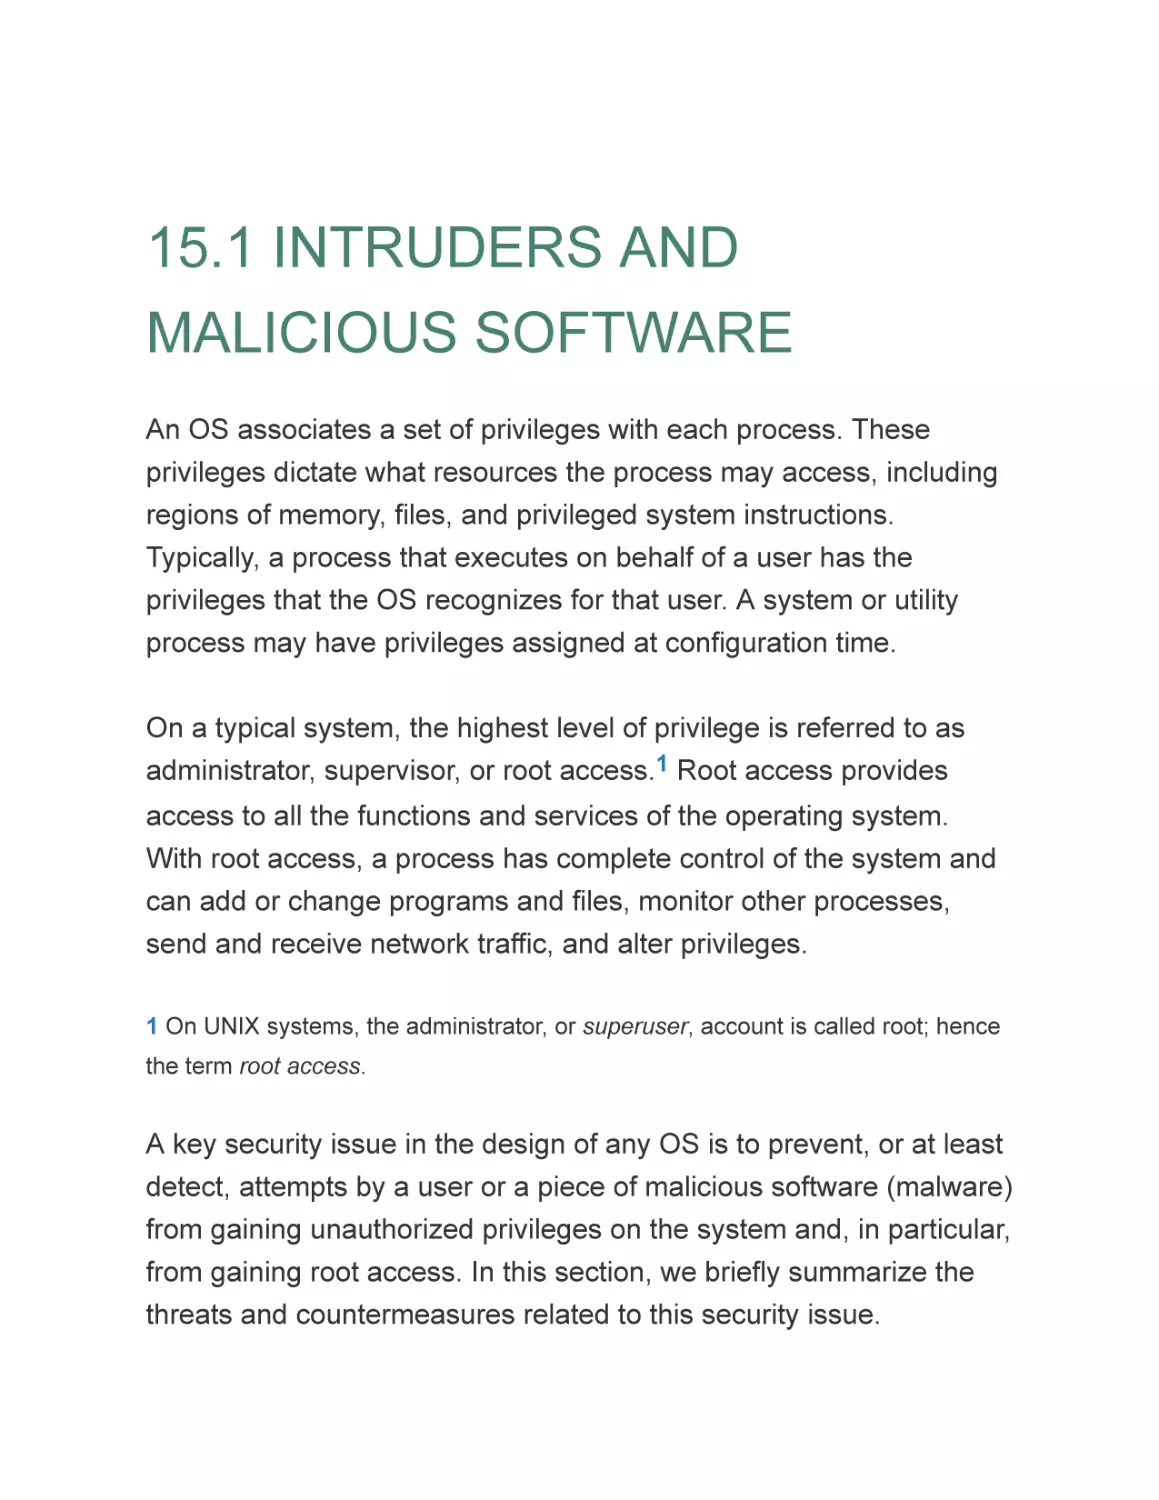 15.1 INTRUDERS AND MALICIOUS SOFTWARE